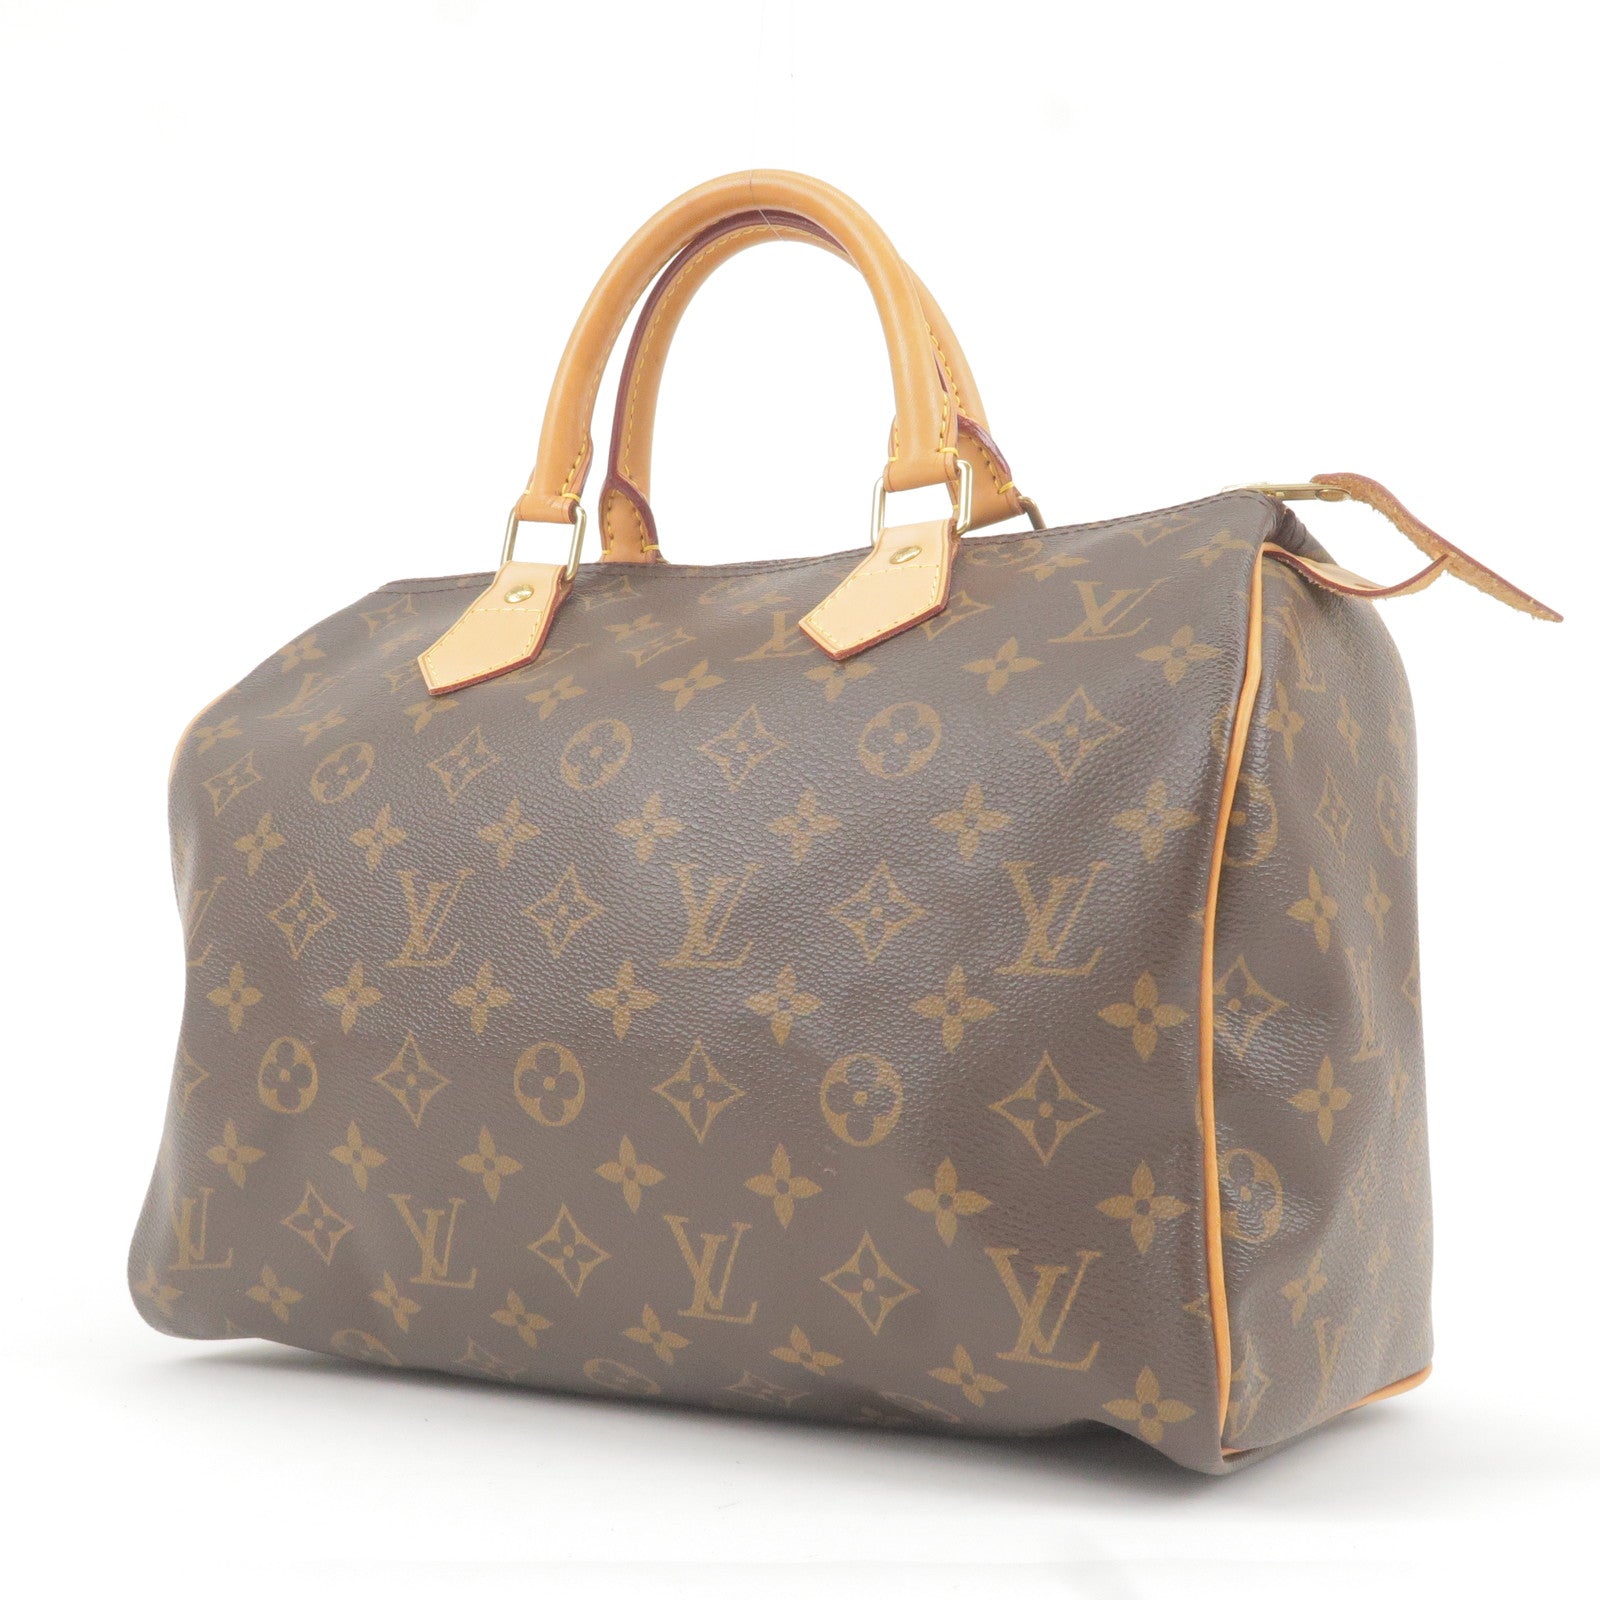 Louis Vuitton Triana second hand prices